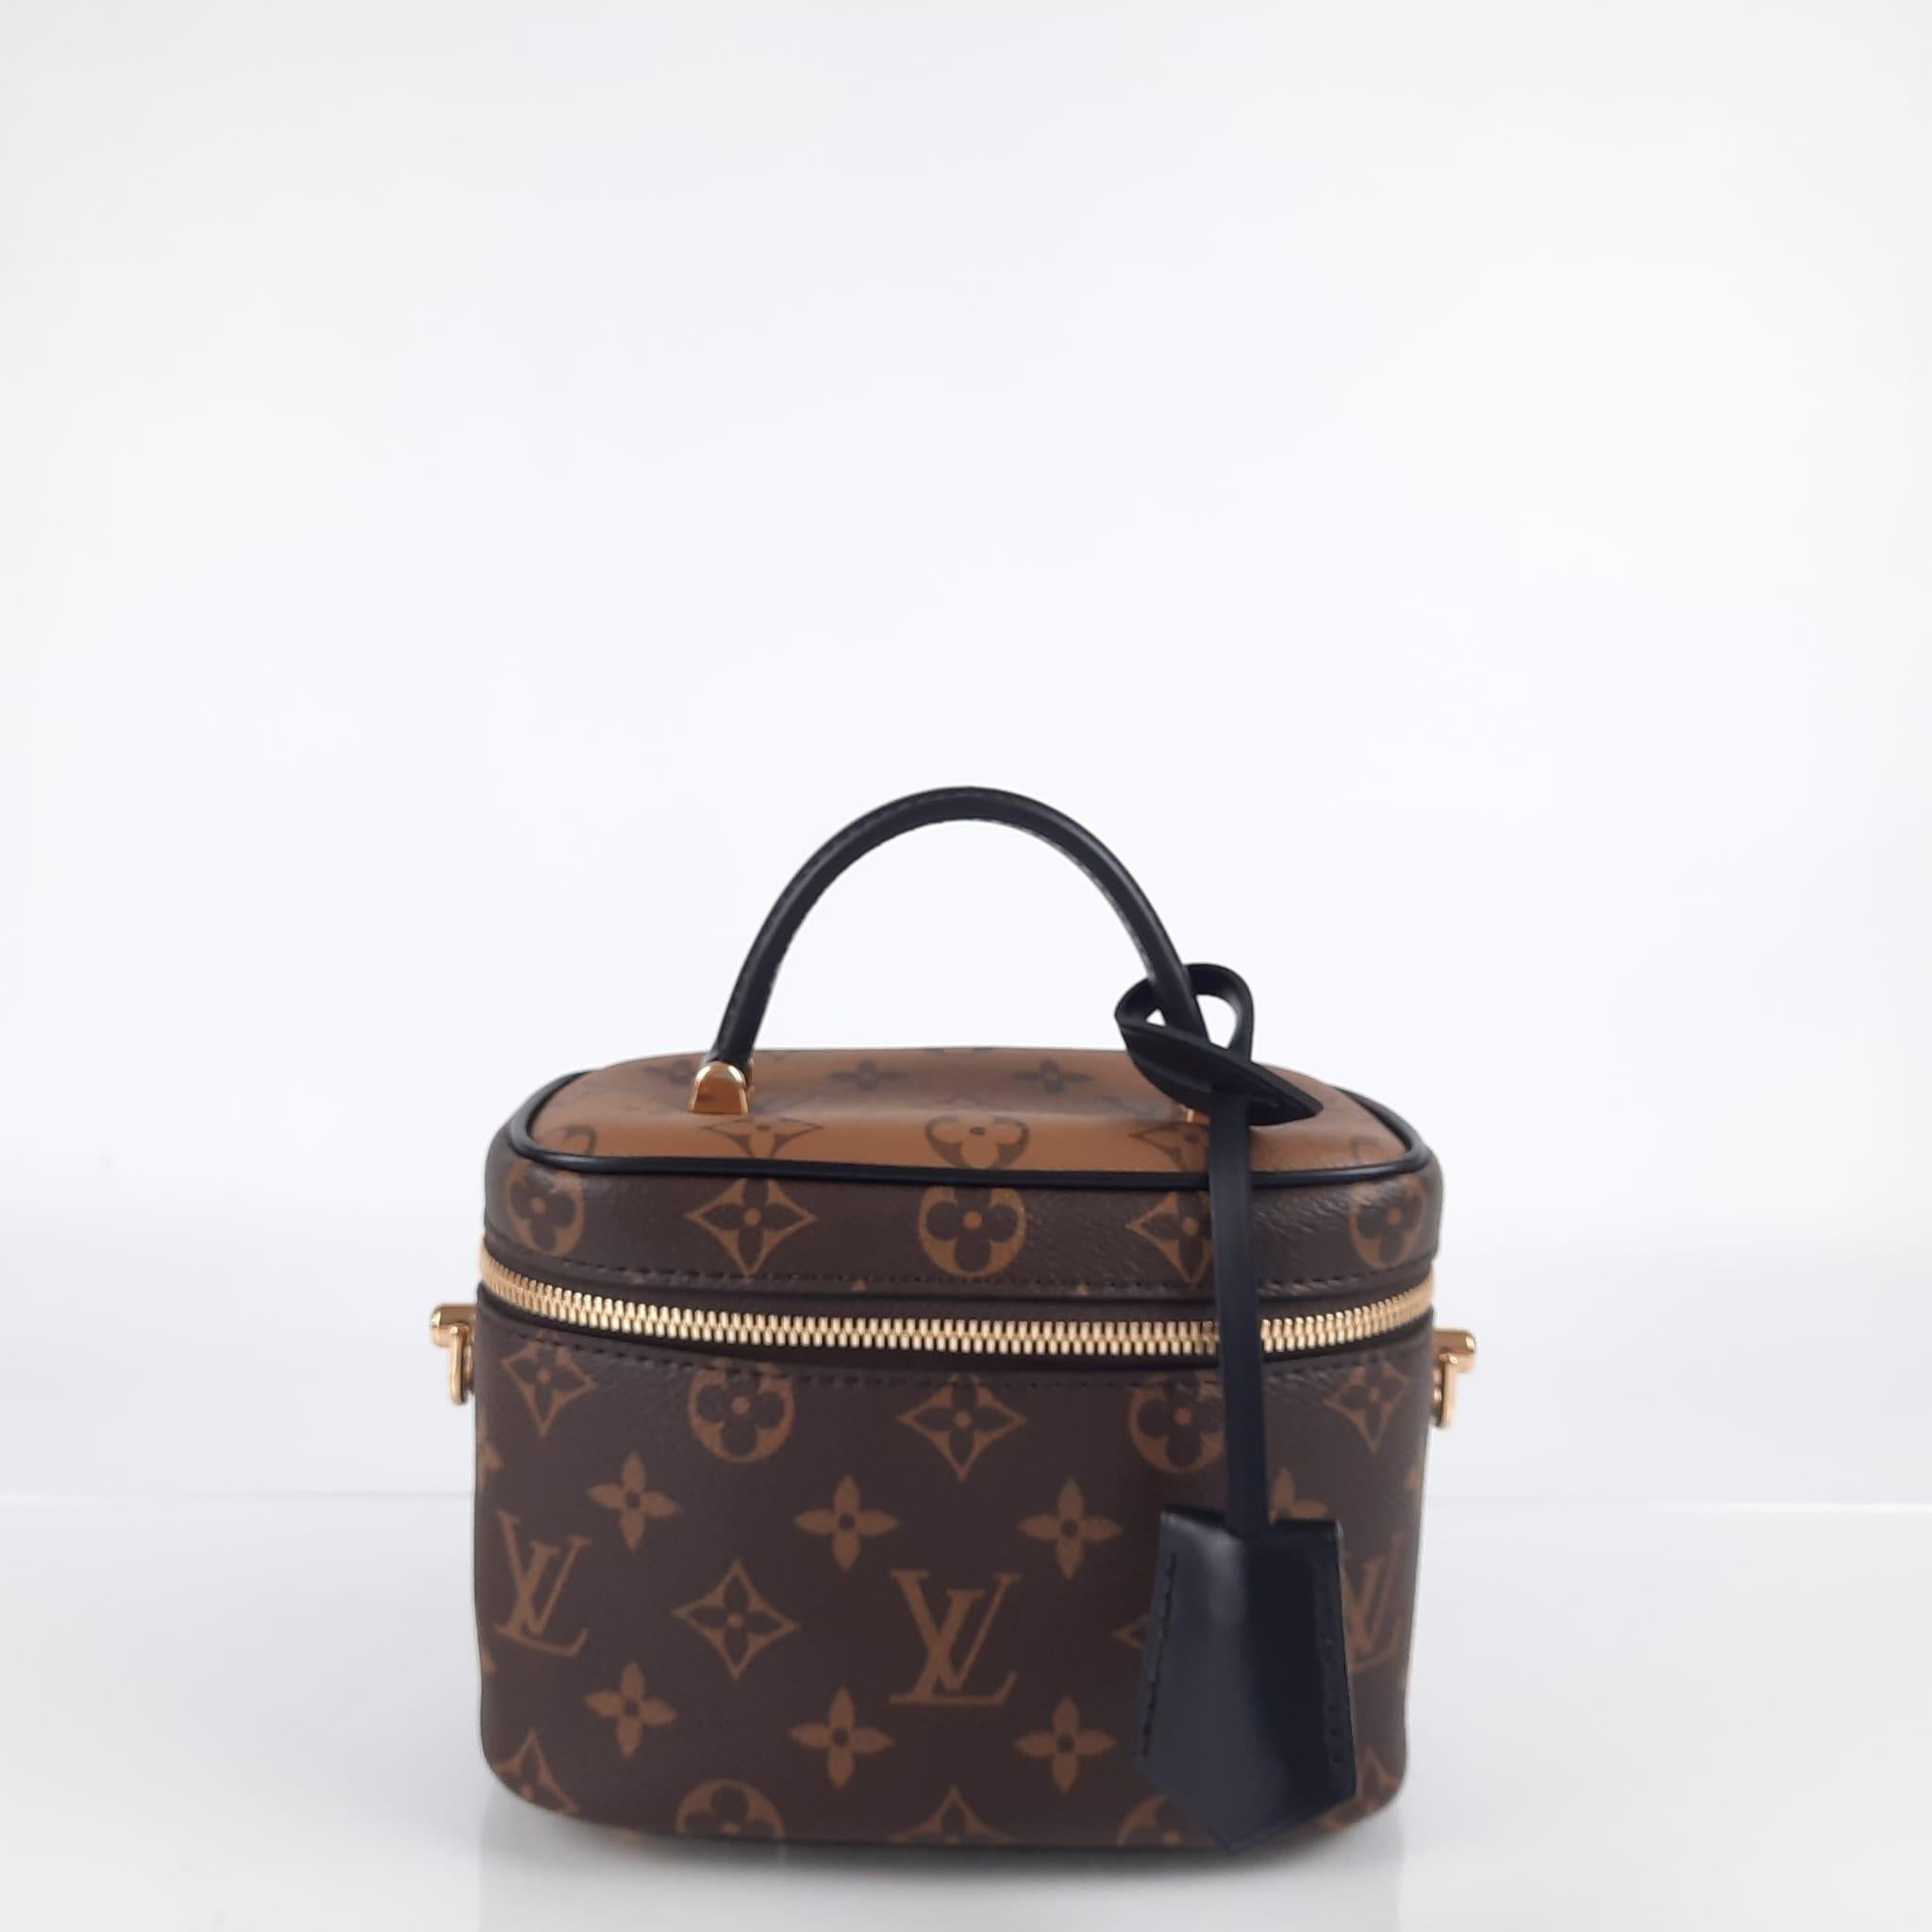 Louis Vuitton Vanity PM Monogram and Monogram Reverse coated canvas In New Condition For Sale In Nicosia, CY